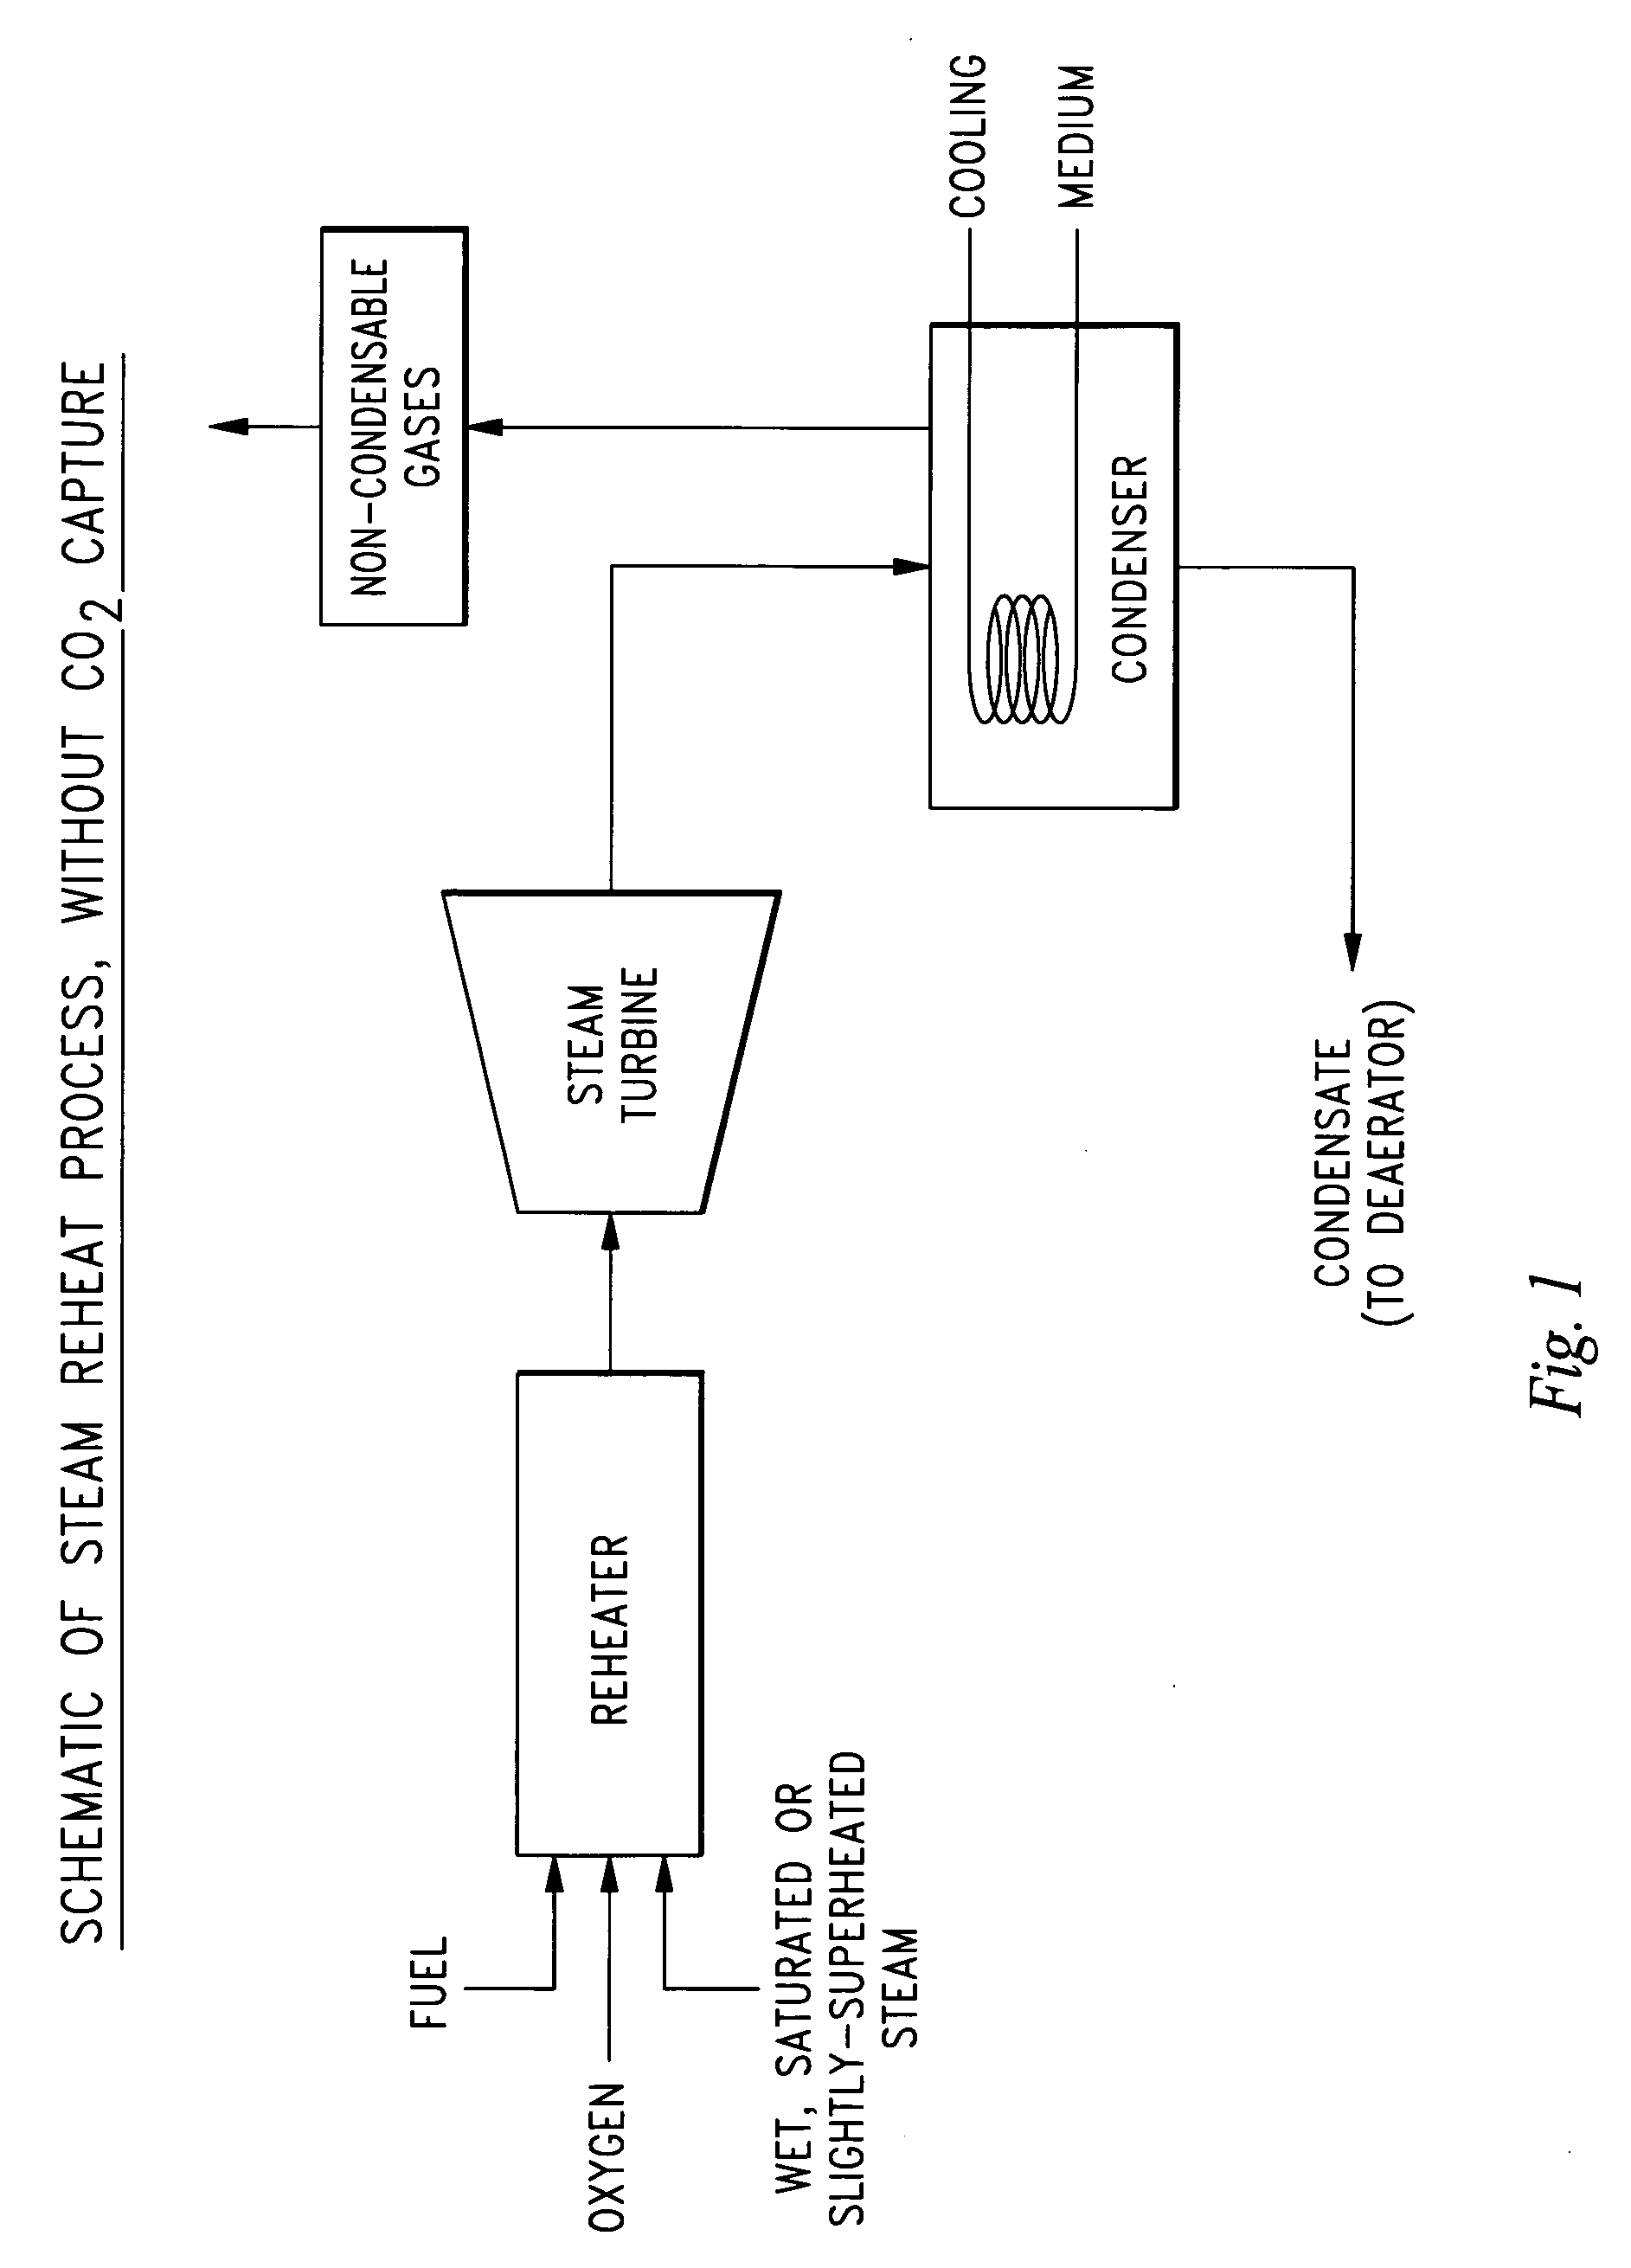 Method and system for enhancing power output of renewable thermal cycle power plants